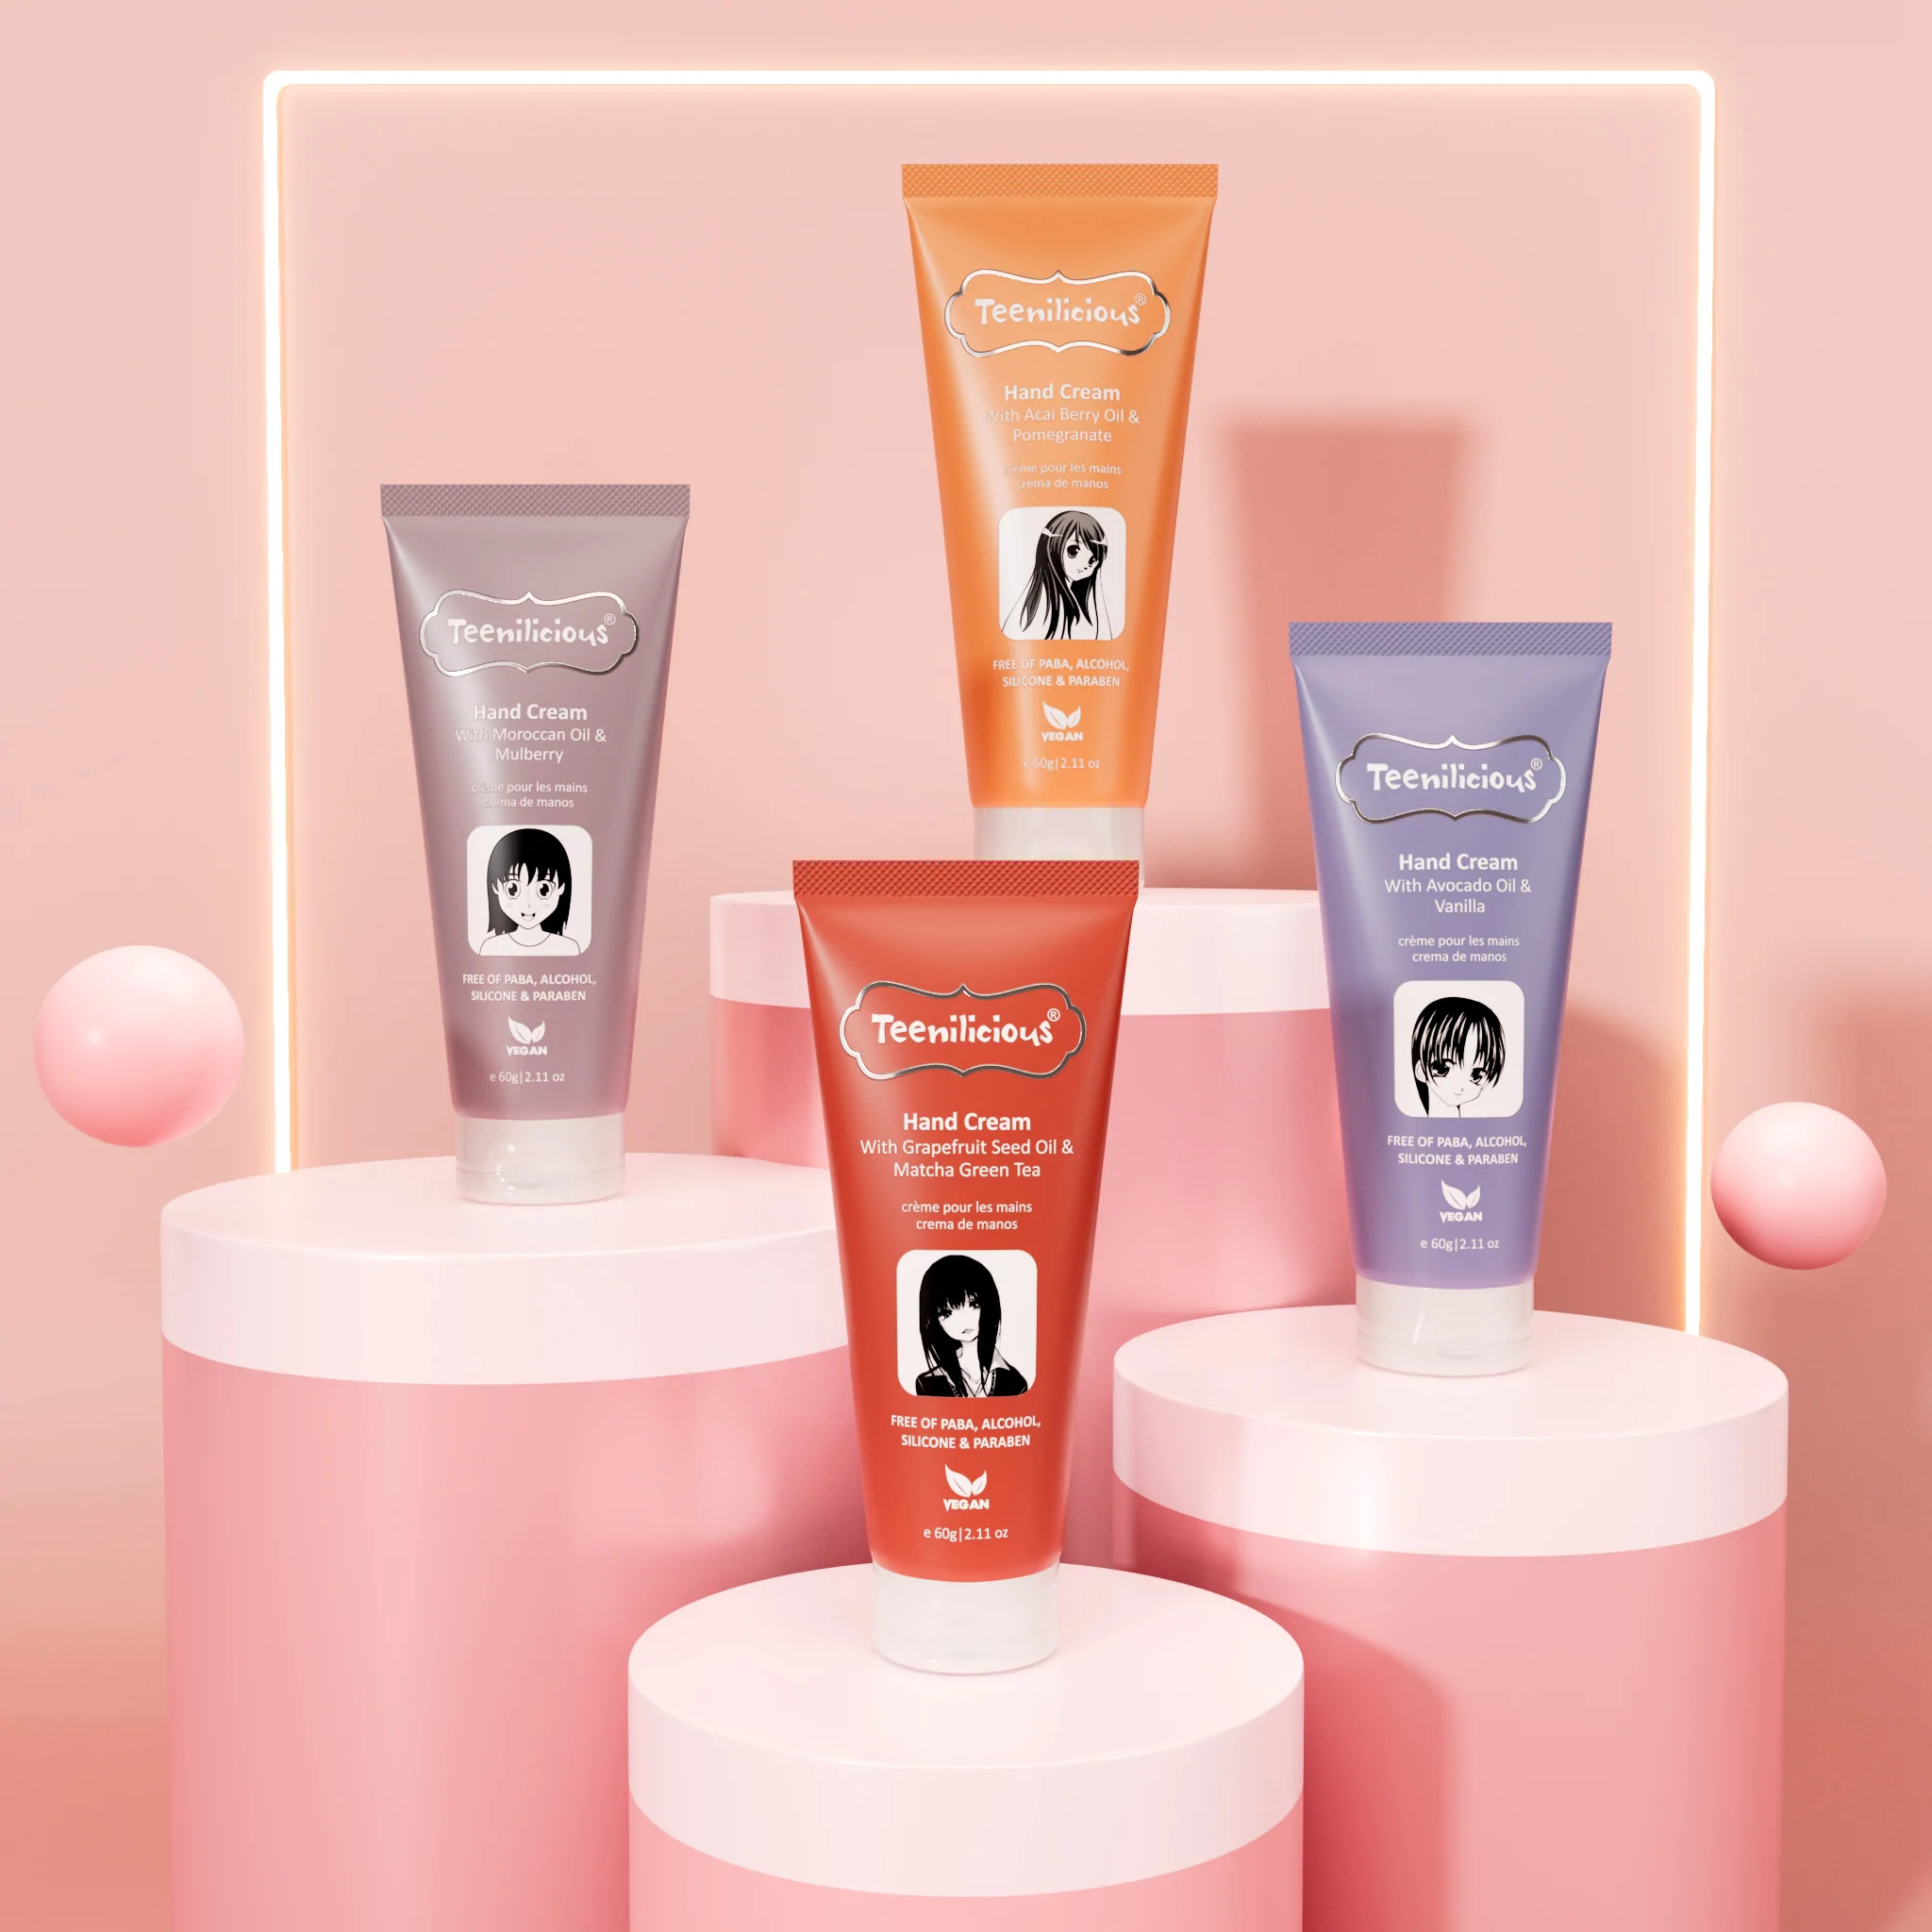 Top Quality Hand Cream Products In India | Hand Creams Suitable For Your Skin Type | Teenilicious